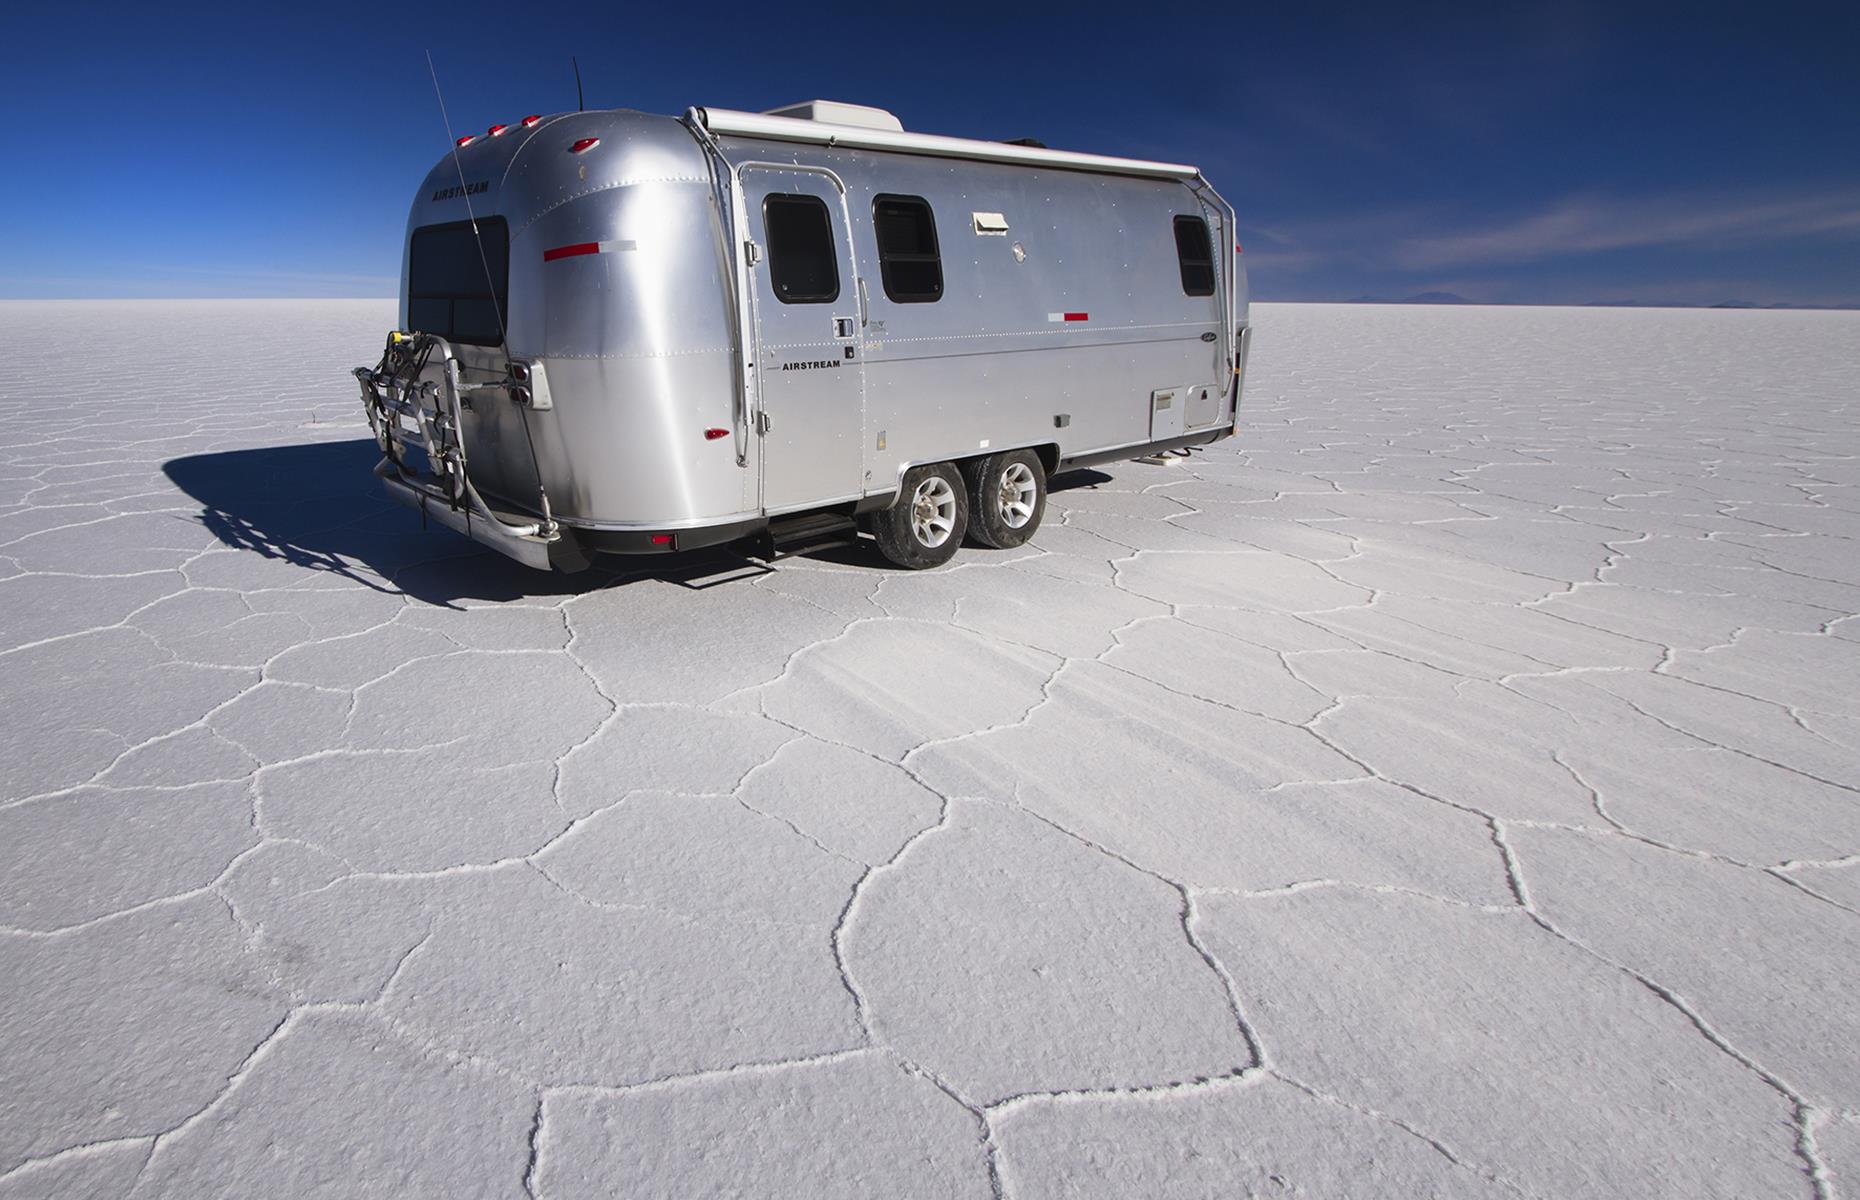 <p>For a serious adventure, go all out for your Airstream experience and book a two-night tour in your own shiny trailer with <a href="https://www.sunvil.co.uk/">Sunvil</a> in Bolivia. For $1,430 you'll get a 4x4 vehicle and Airstream trailer, your own private guide and cook and they'll park you up on the Bolivian salt flats of the Salar de Uyuni, where evenings can be spent stargazing. </p>